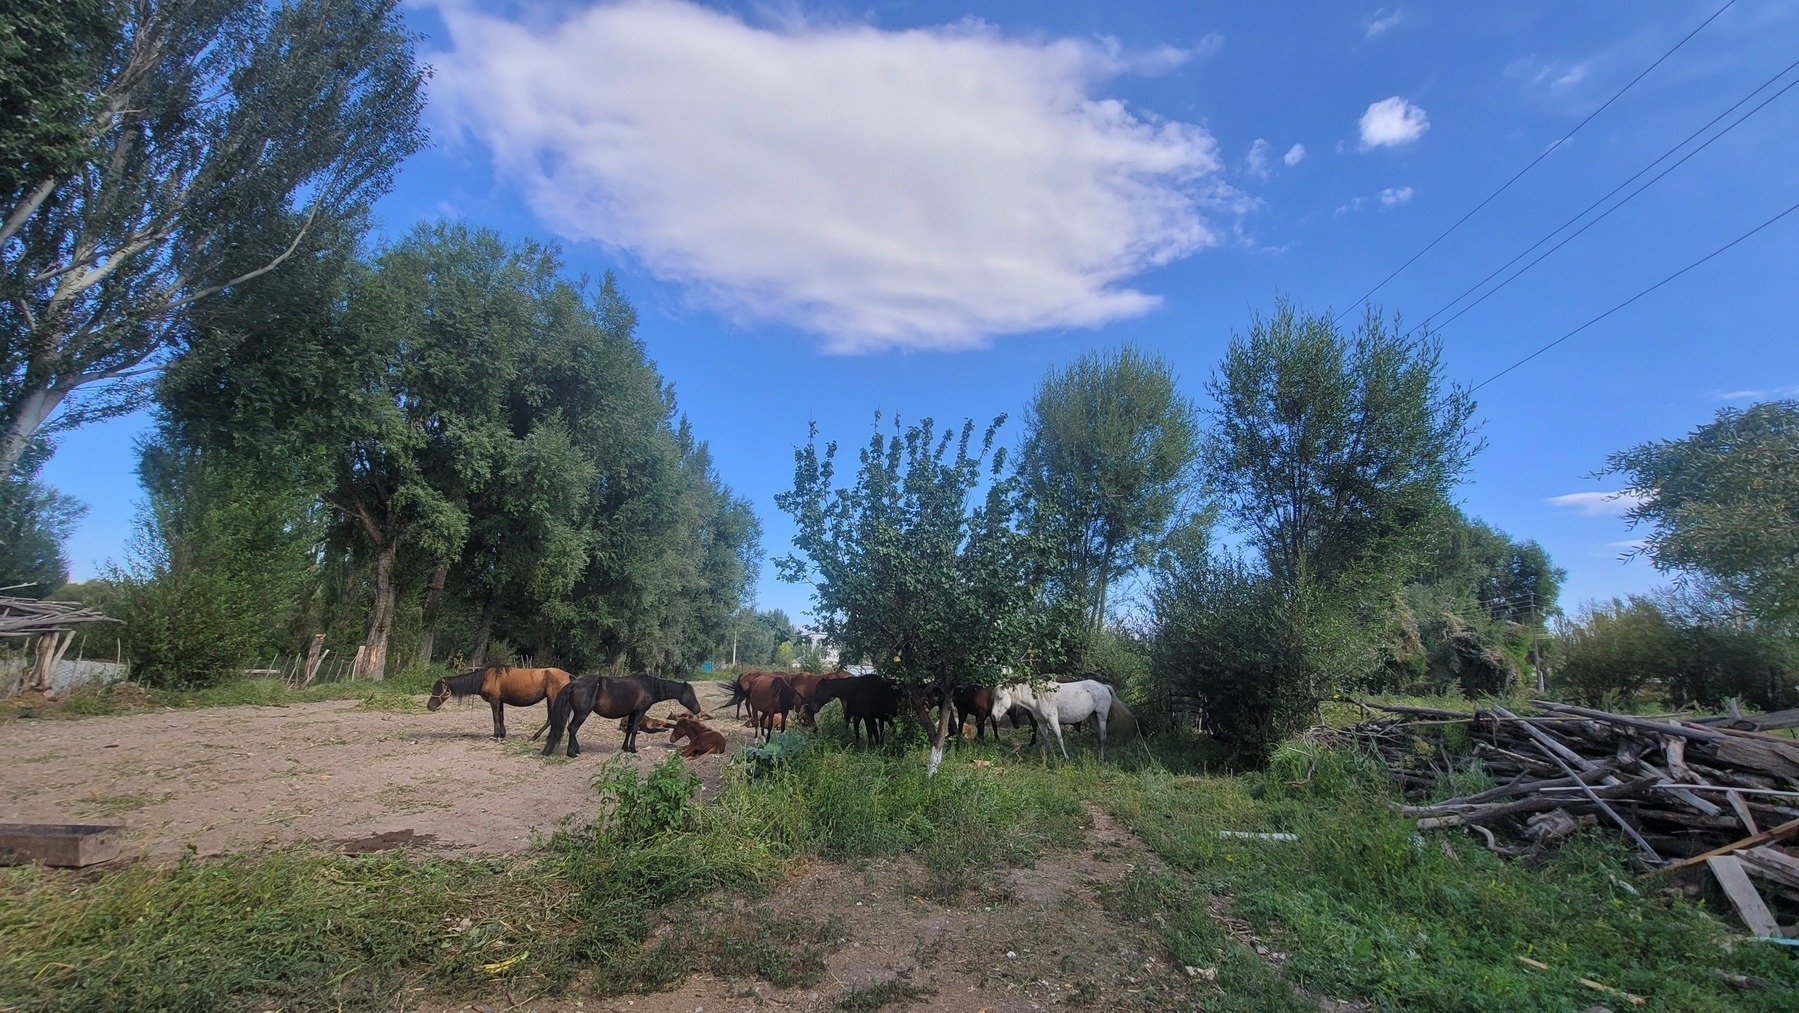 different colored horses standing around on land used for raising vegetables, with trees along the side and a blue sky above